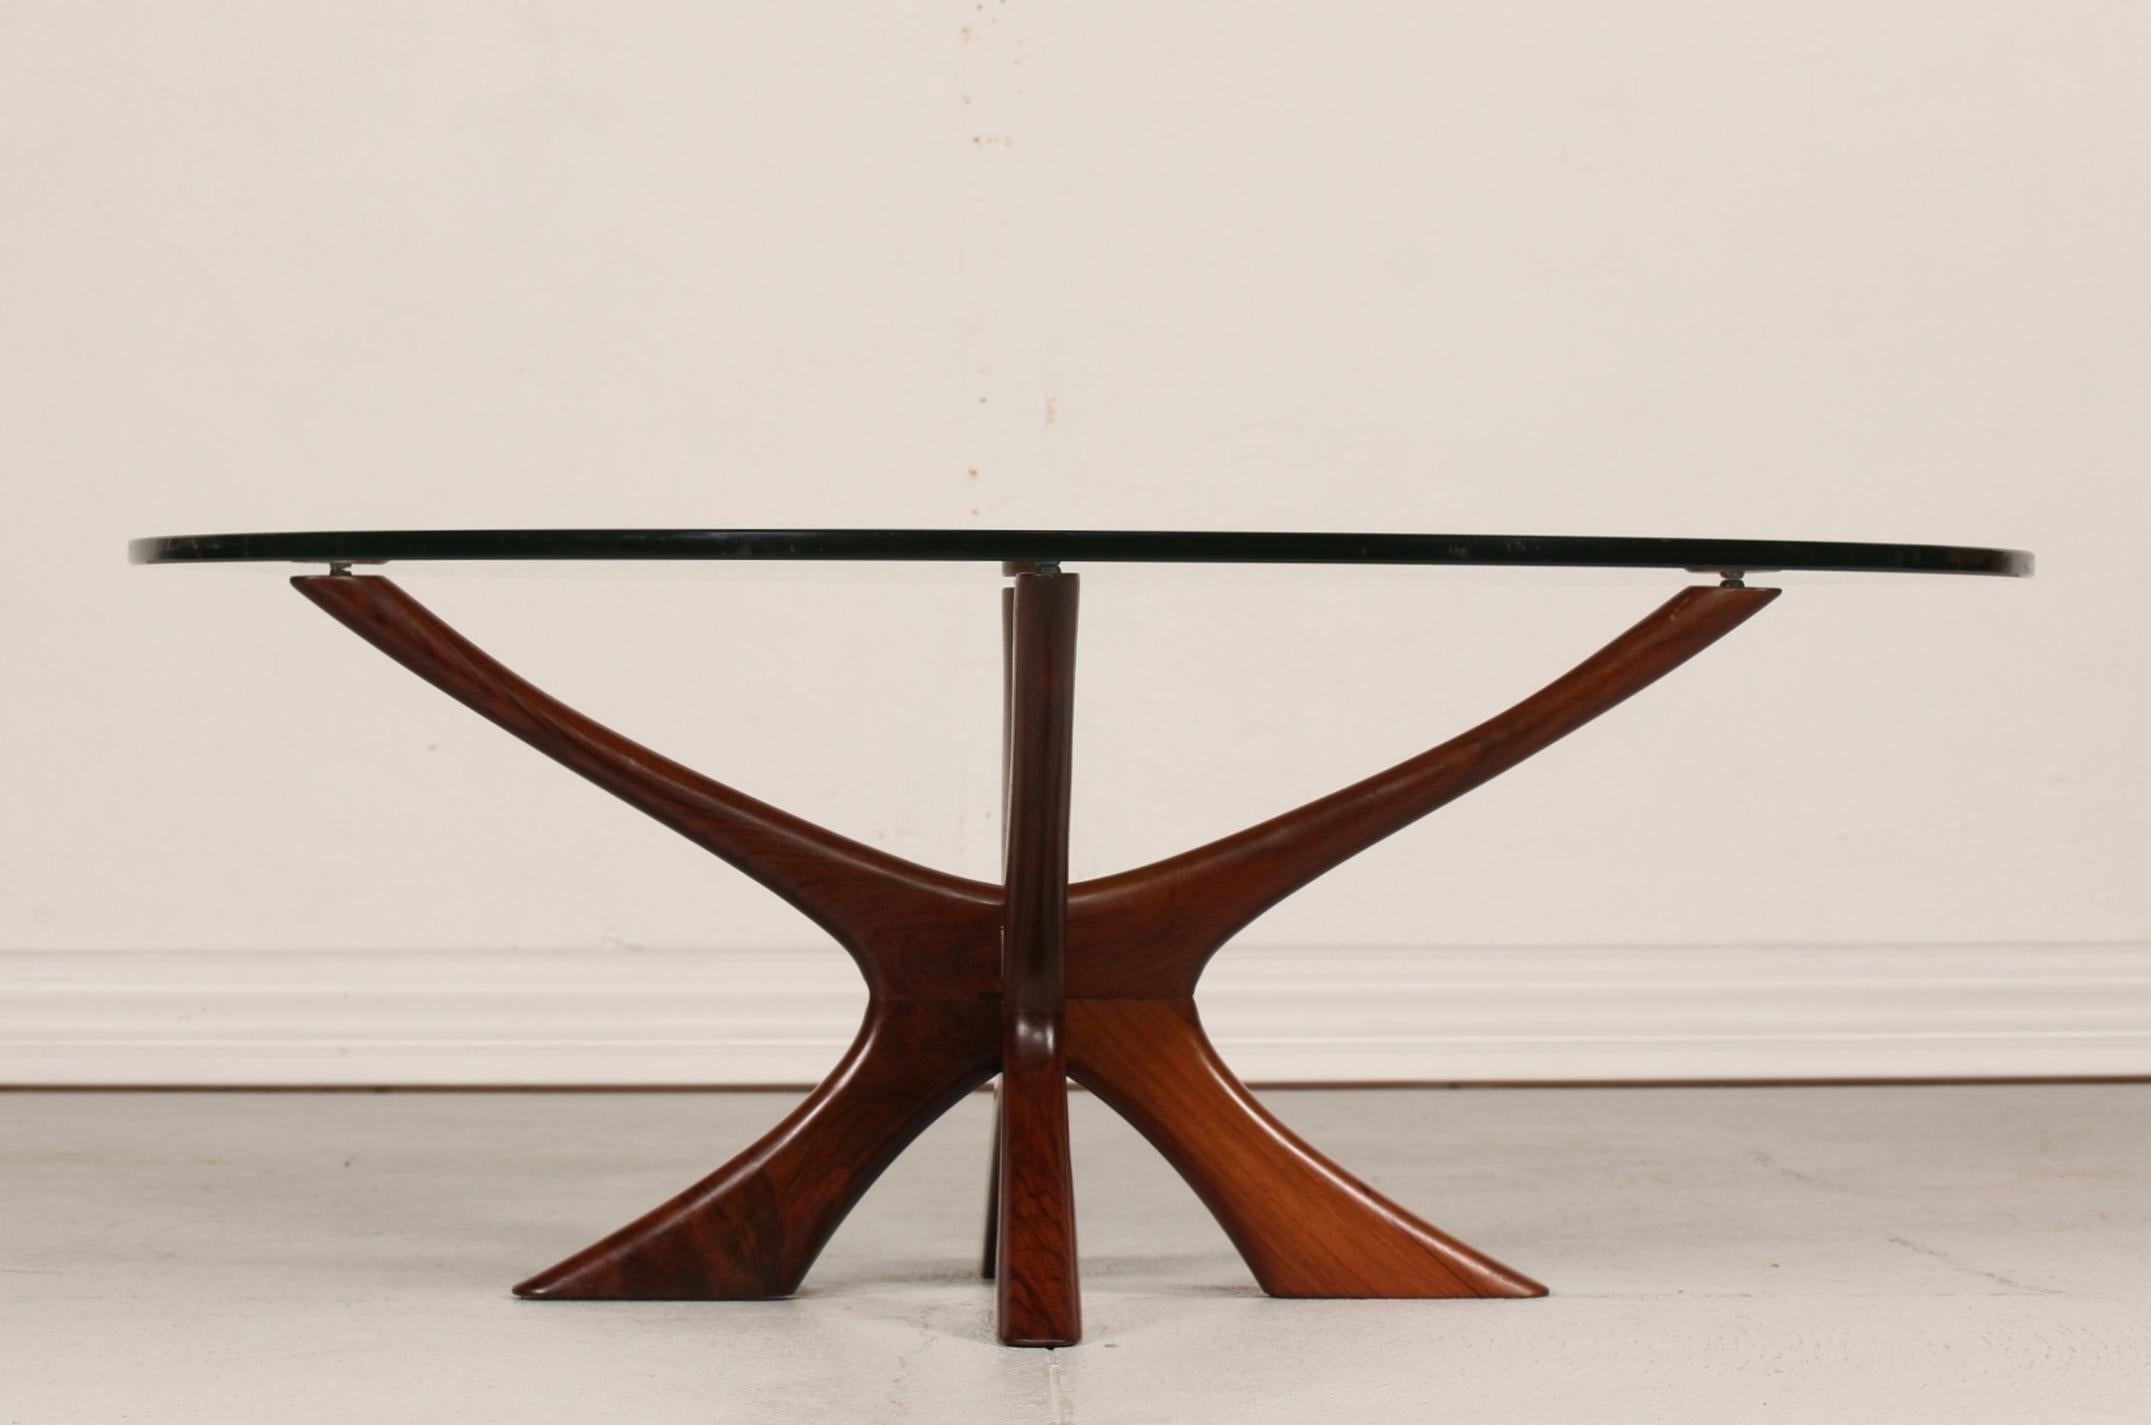 Scandinavian midcentury coffee table with round glass top on a sculptural solid wood frame.
Presumably made by Swedish Örebro Glasindustri AB.
The table is attributed to Fredrik Schriever-Abeln or the Danish architect Illum Wikkelsø.